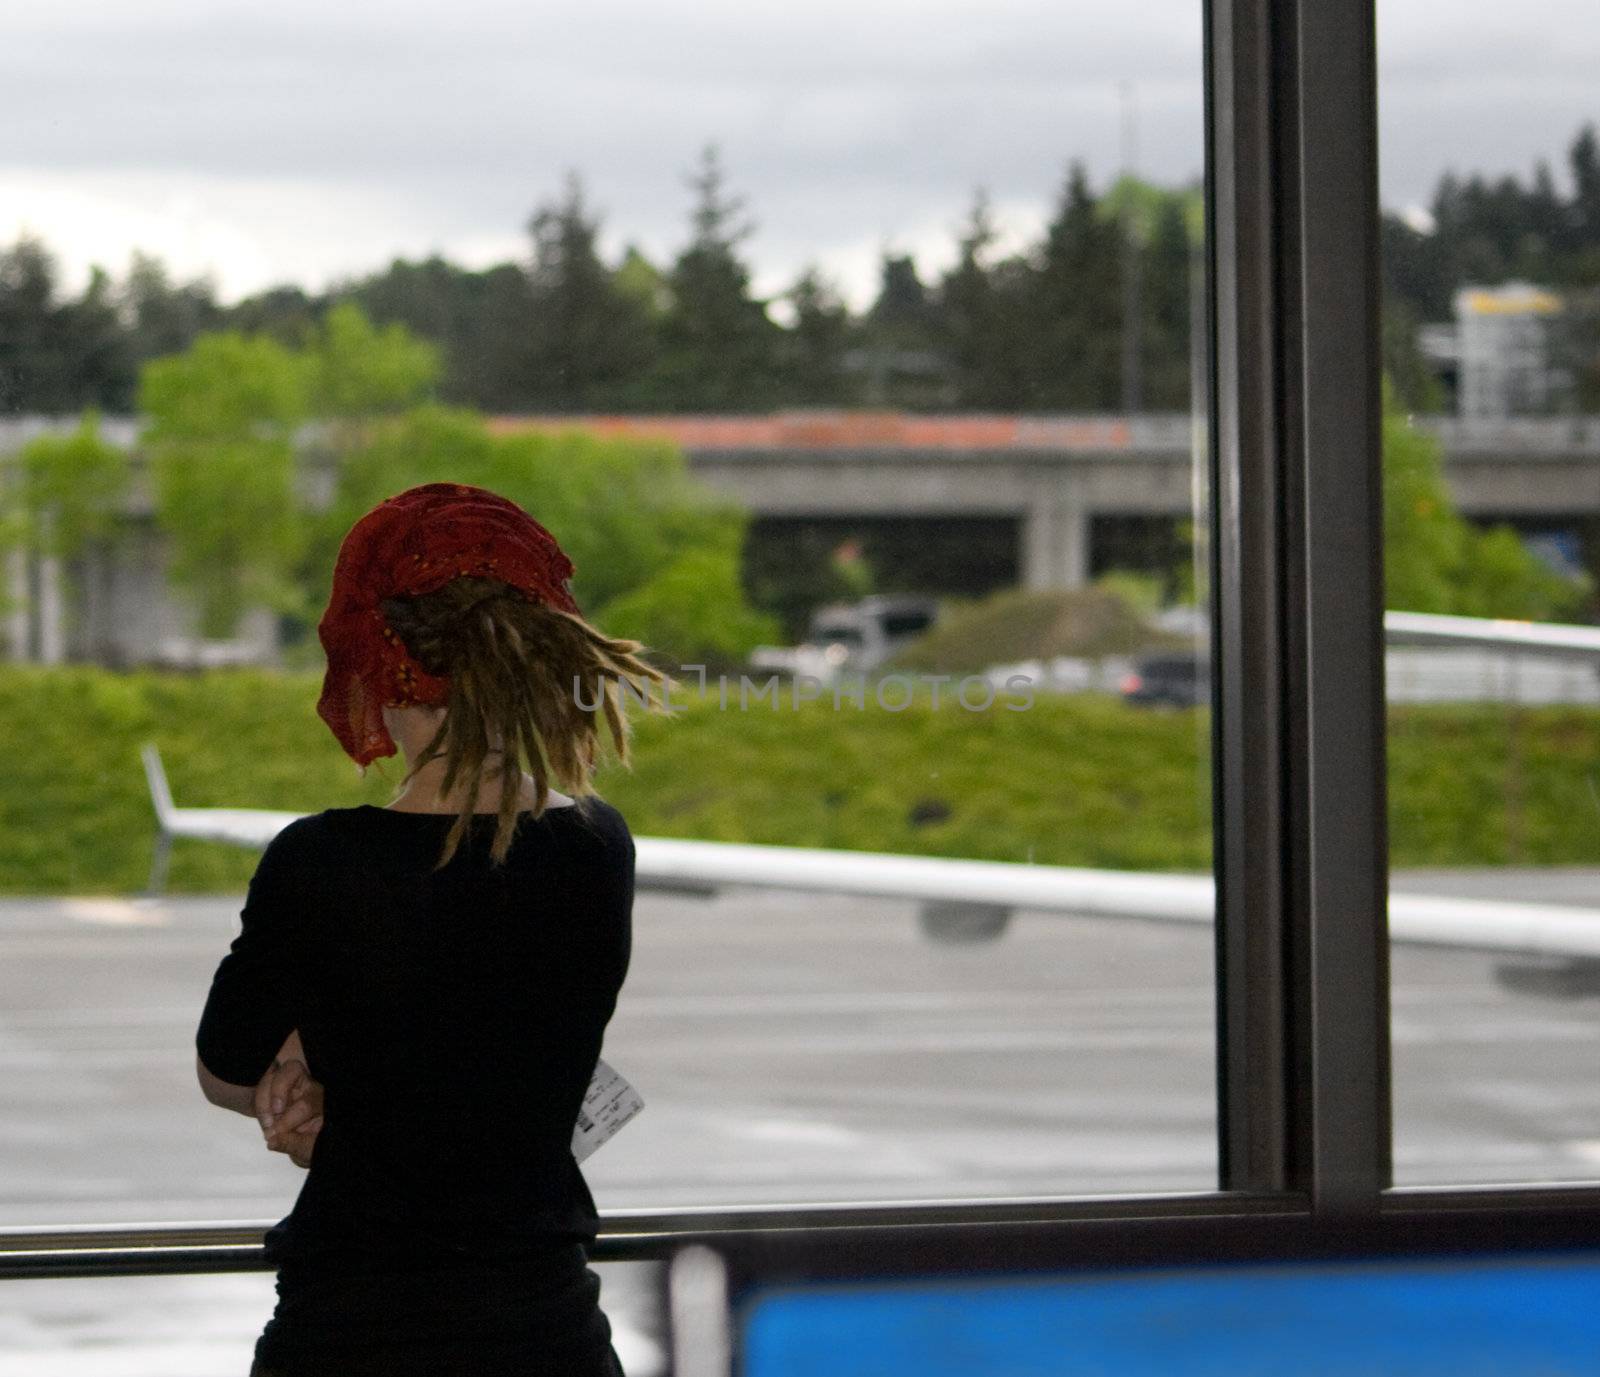 Female Airport Traveler v1 shows a lone young woman looking out an airport terminal window as she waits for her departing flight. She has bags or luggage sitting next to her as she waits. There is an aircraft wing showing of a nearby plane.
